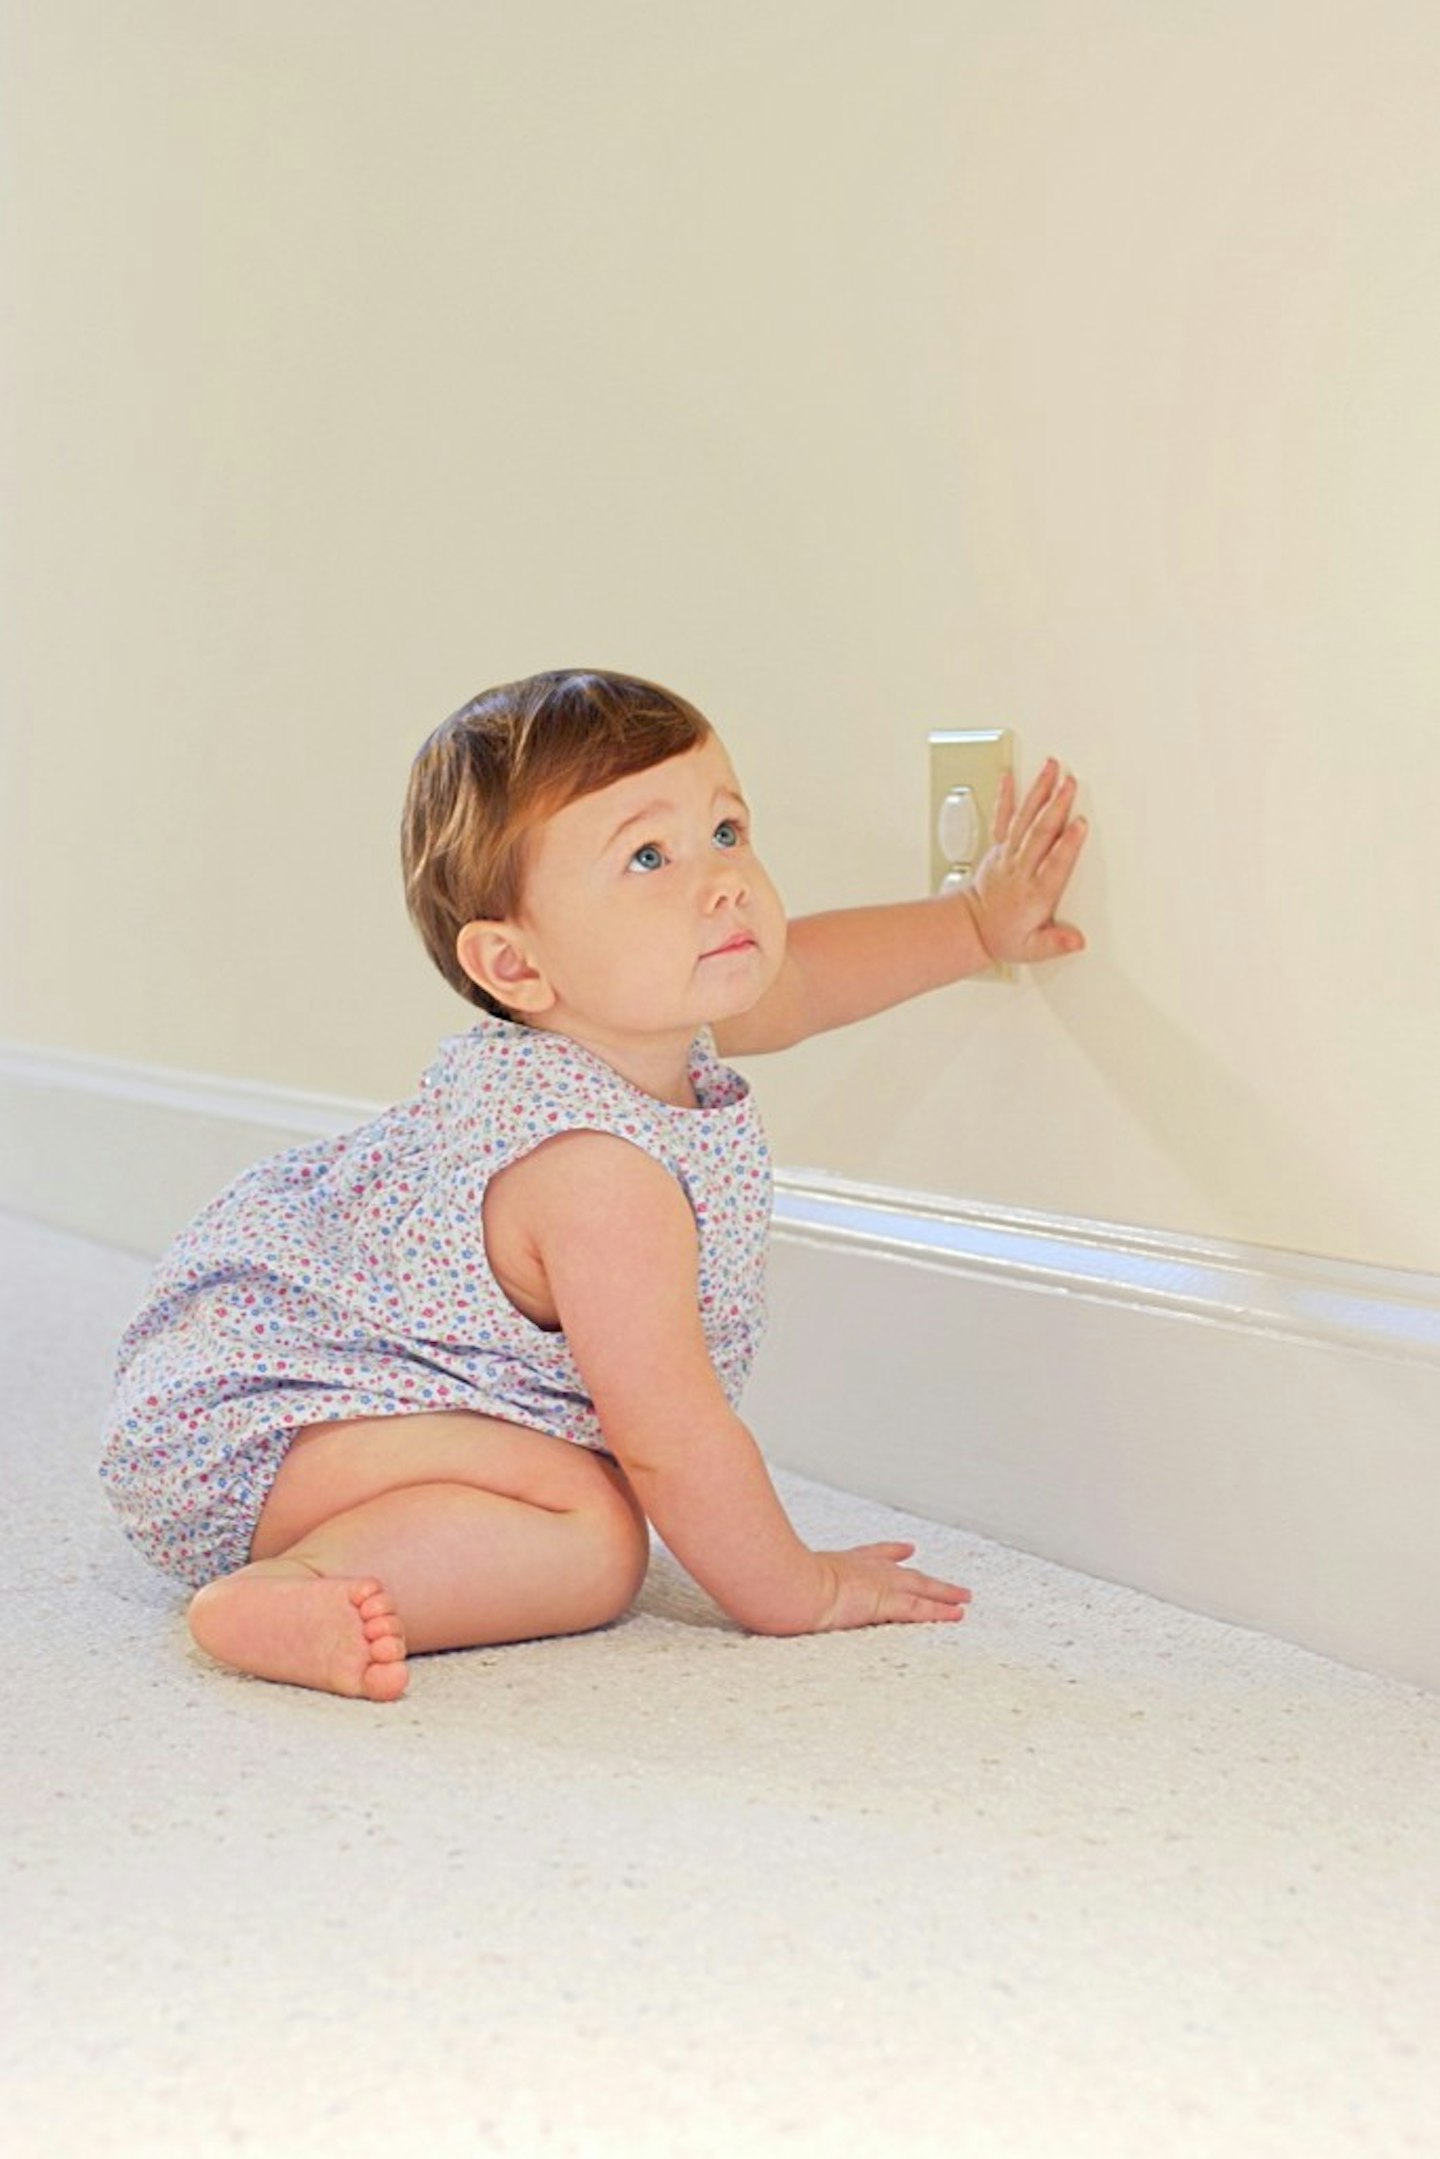 Keep your toddler safe by blocking off plugs and sockets